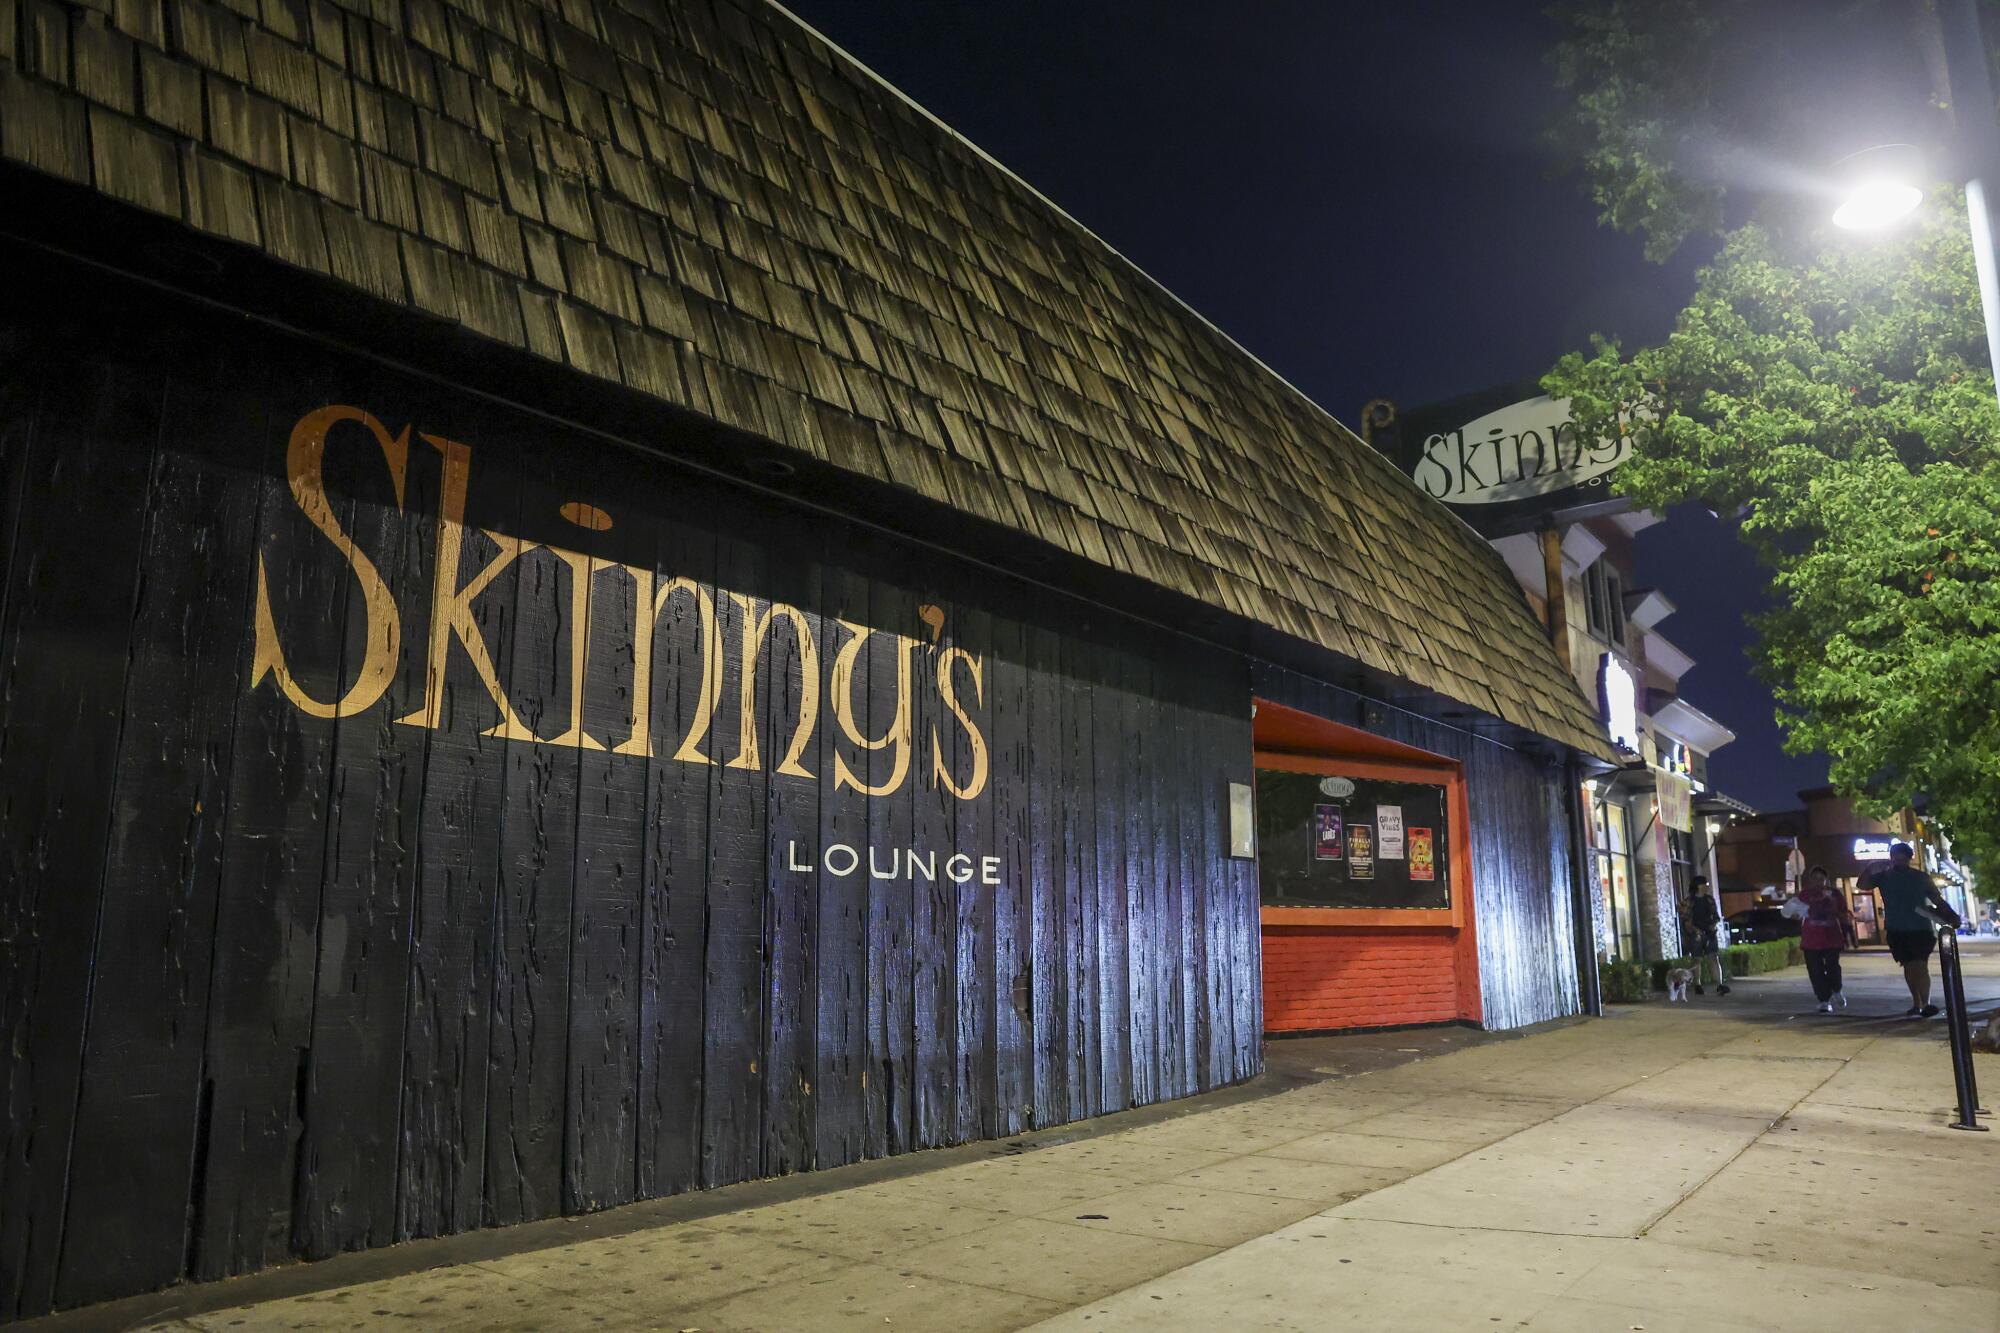 Exterior view of Skinny's Lounge in North Hollywood.